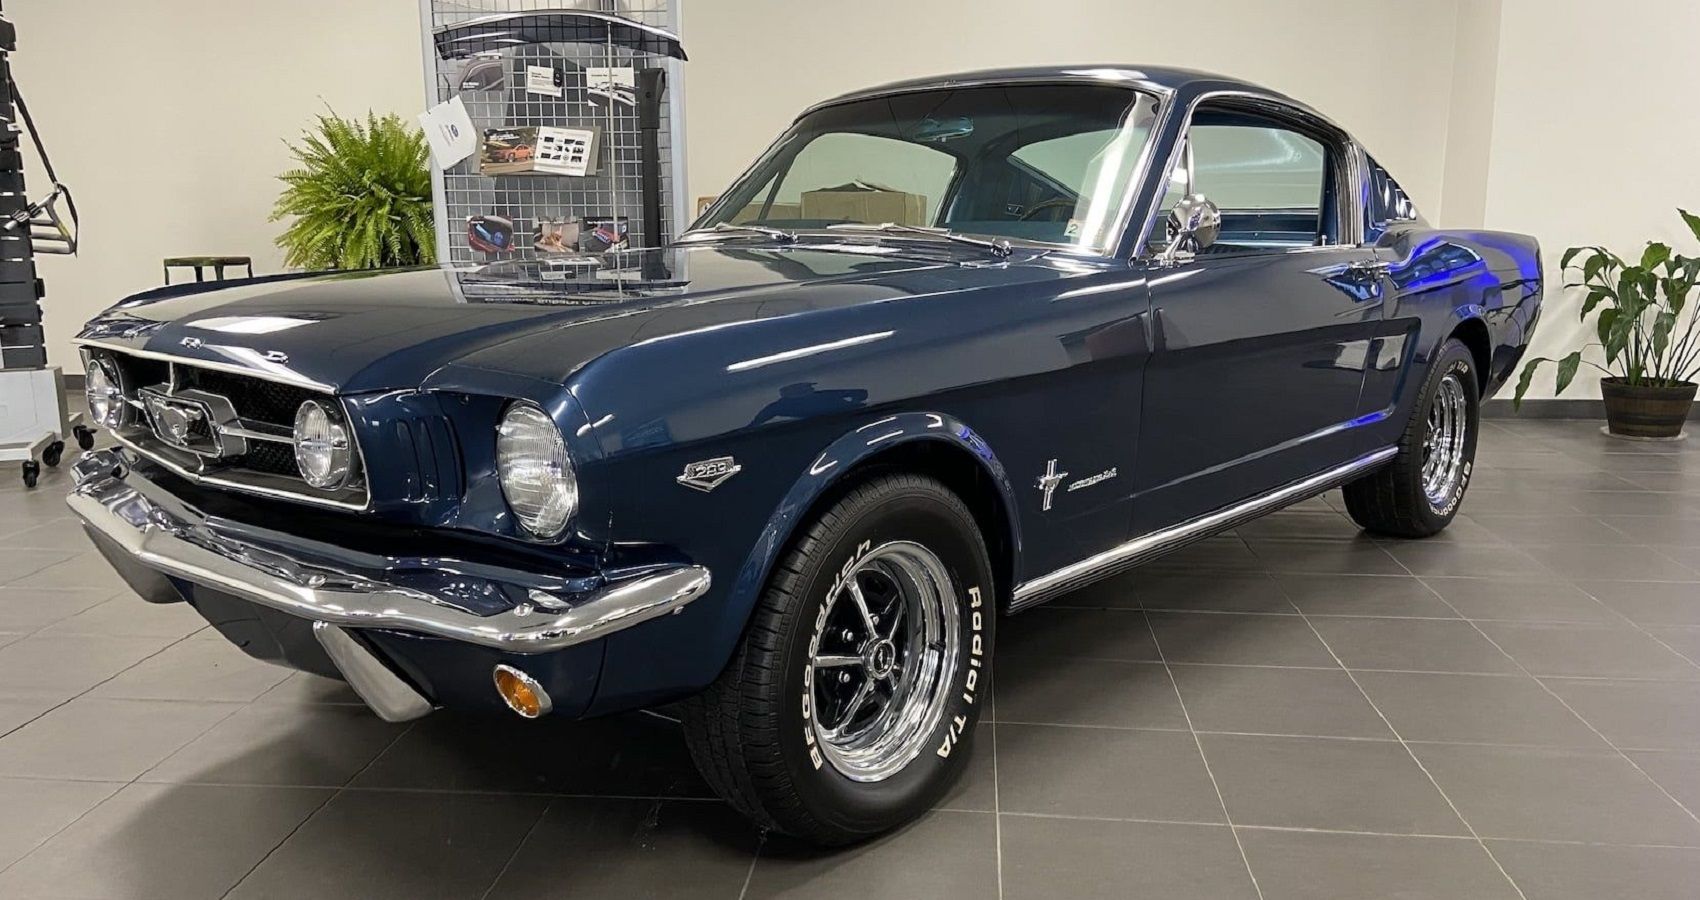 How Much is 1965 Mustang Worth